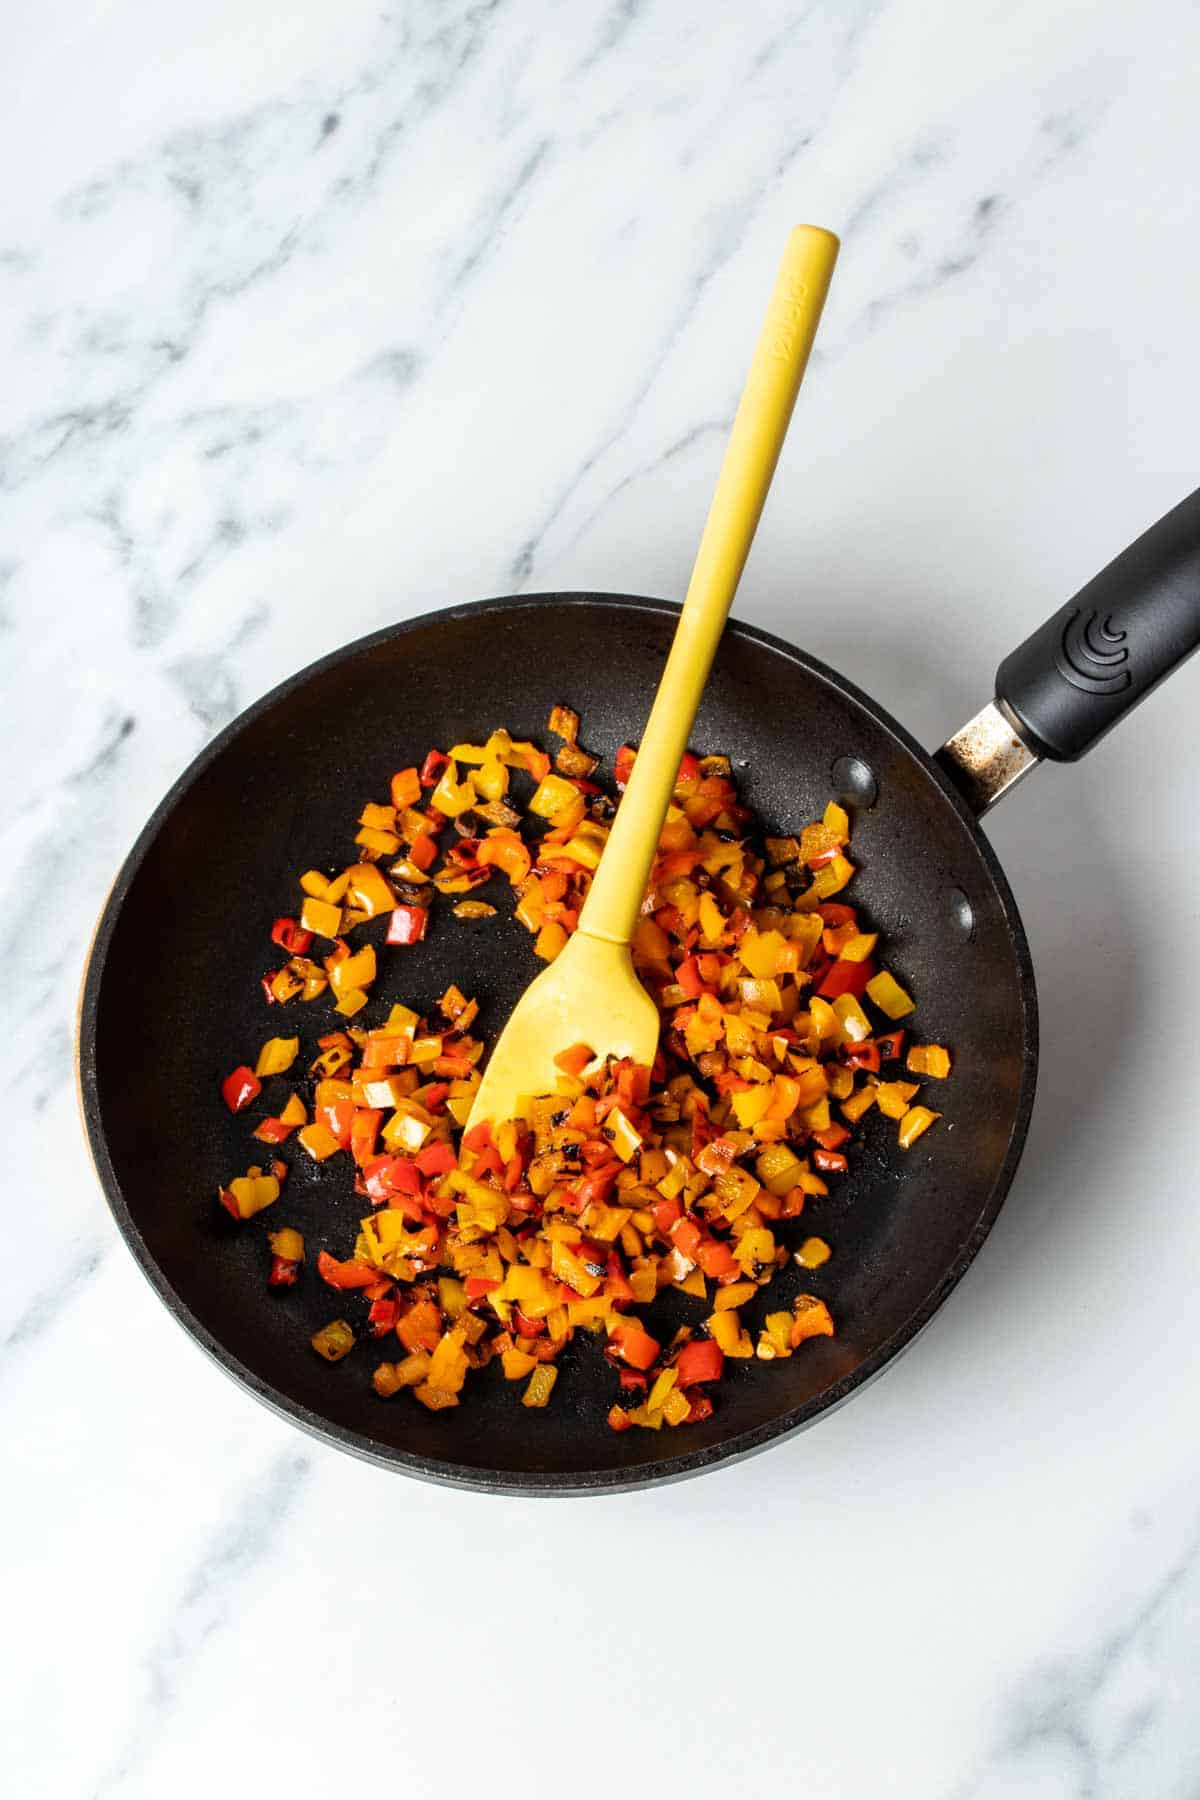 A yellow spatula mixing cooked chopped peppers in a black pan.